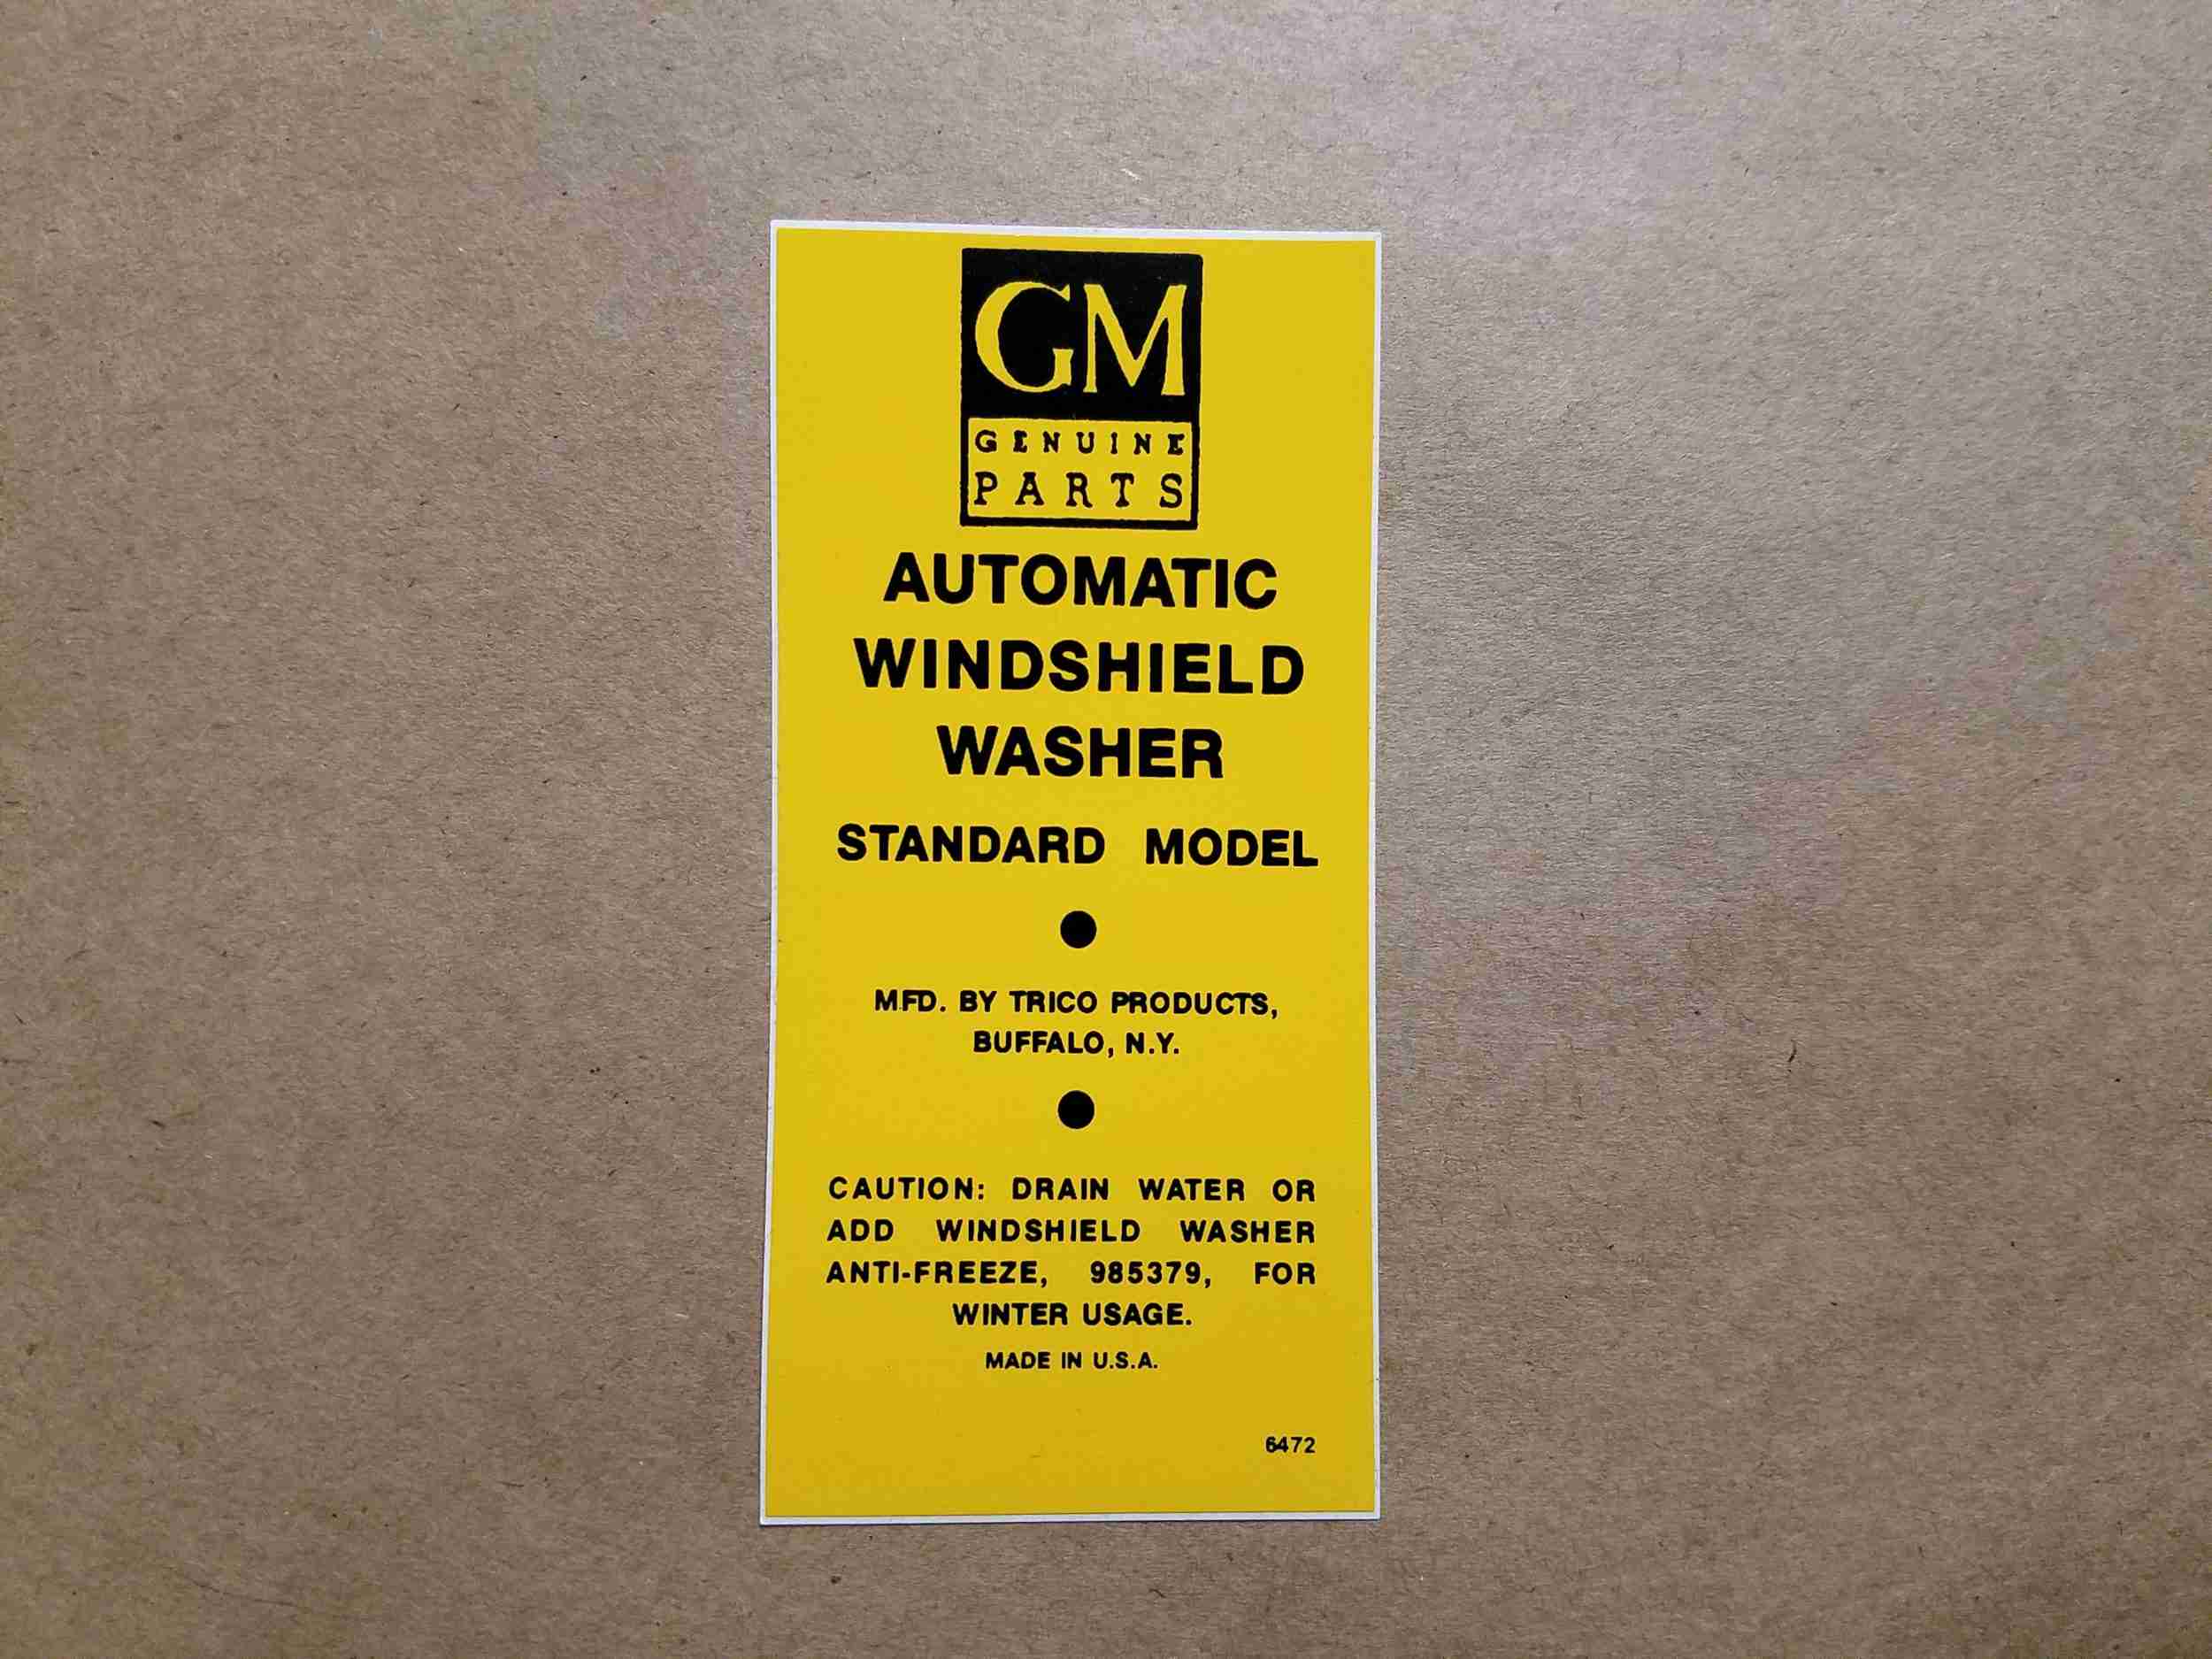 1940-60 Trico Windshield Washer Bracket Decal, on decal: 6472